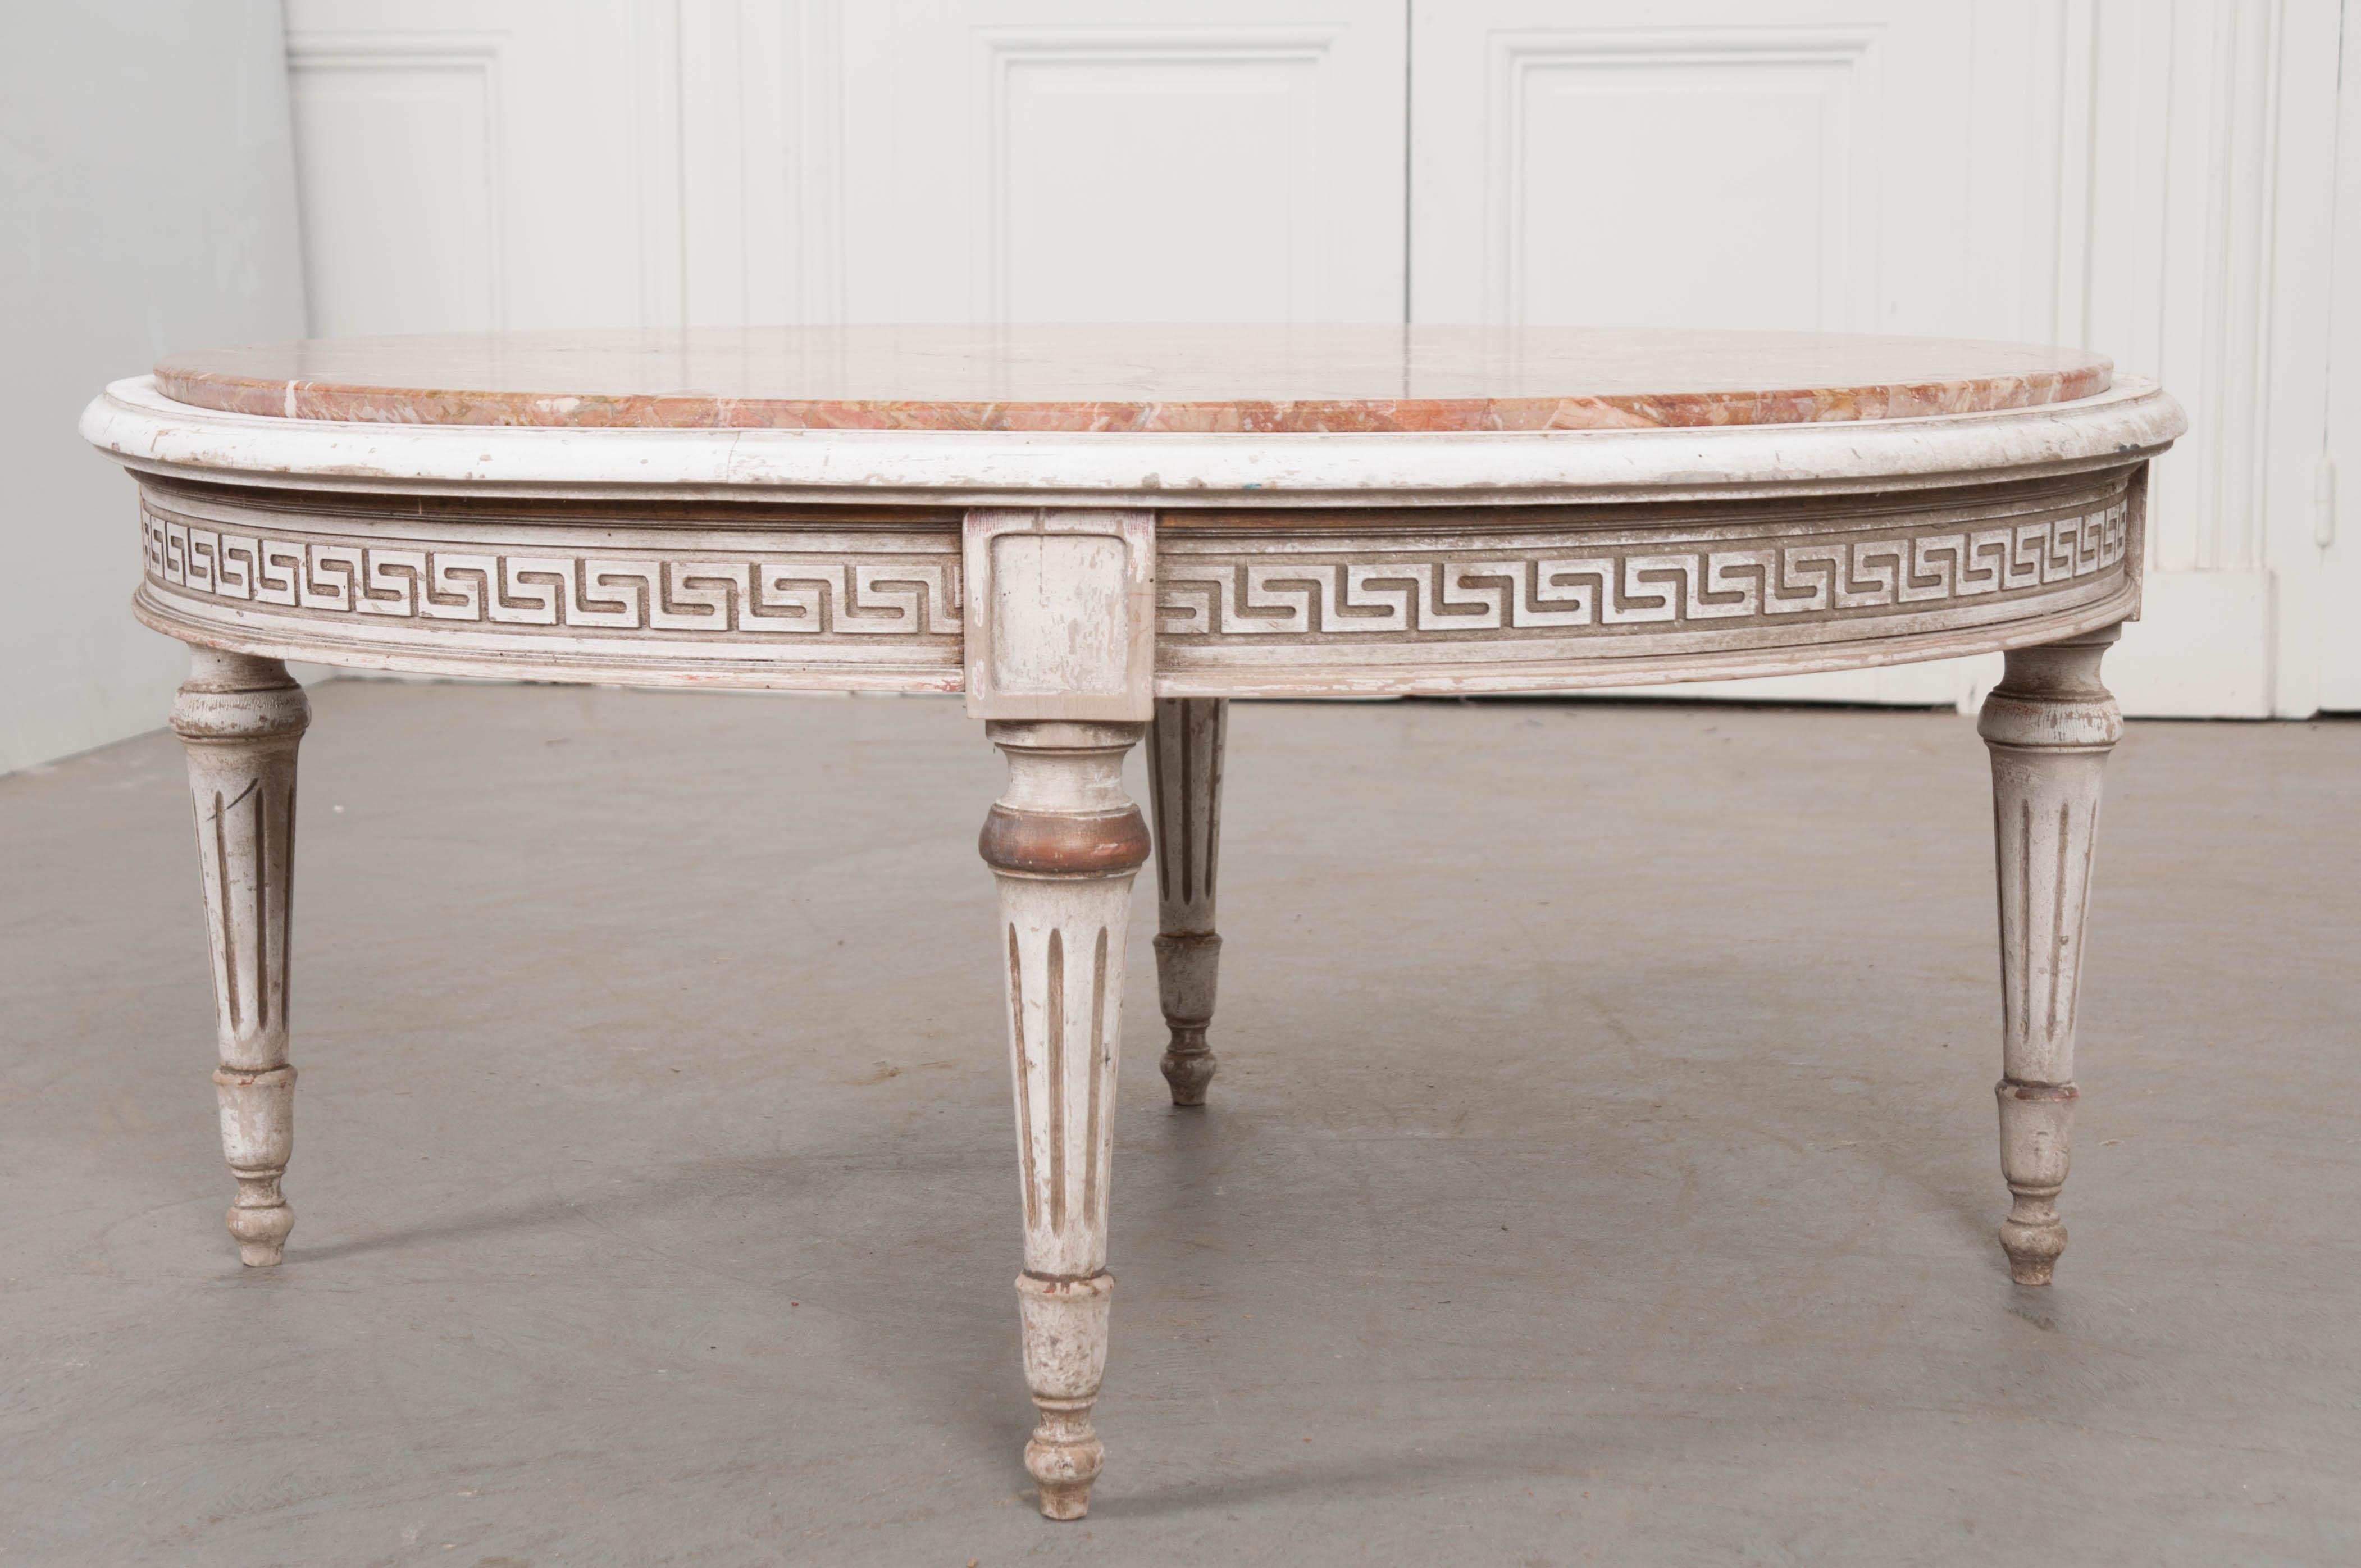 A gorgeous round coffee table, made in France, circa 1900, with exceptional red marble top. The table has four turned and tapered legs with fluted details that lift the table and meet the top at the table’s apron. The circular apron has been styled